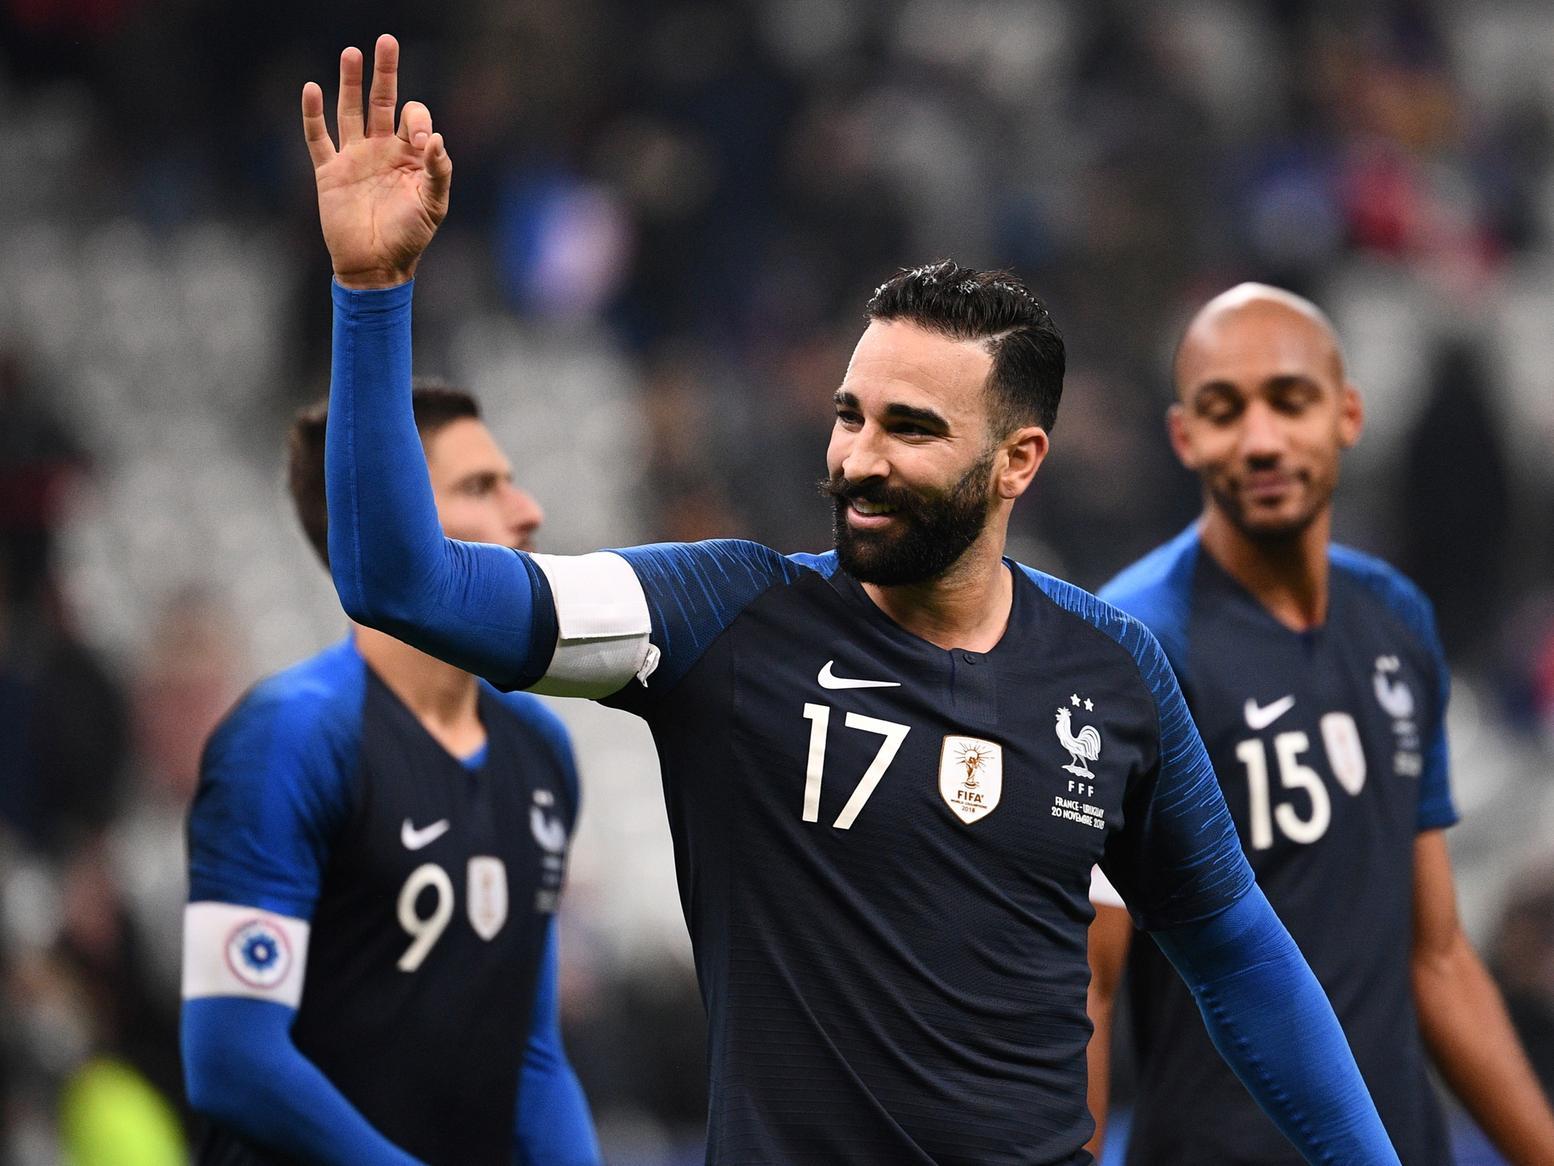 Derby County are said to be plotting a shock swoop for Fenebahce's veteran defender Adil Rami, who was previously on the books of sides such as AC Milan and Sevilla. (The Athletic)